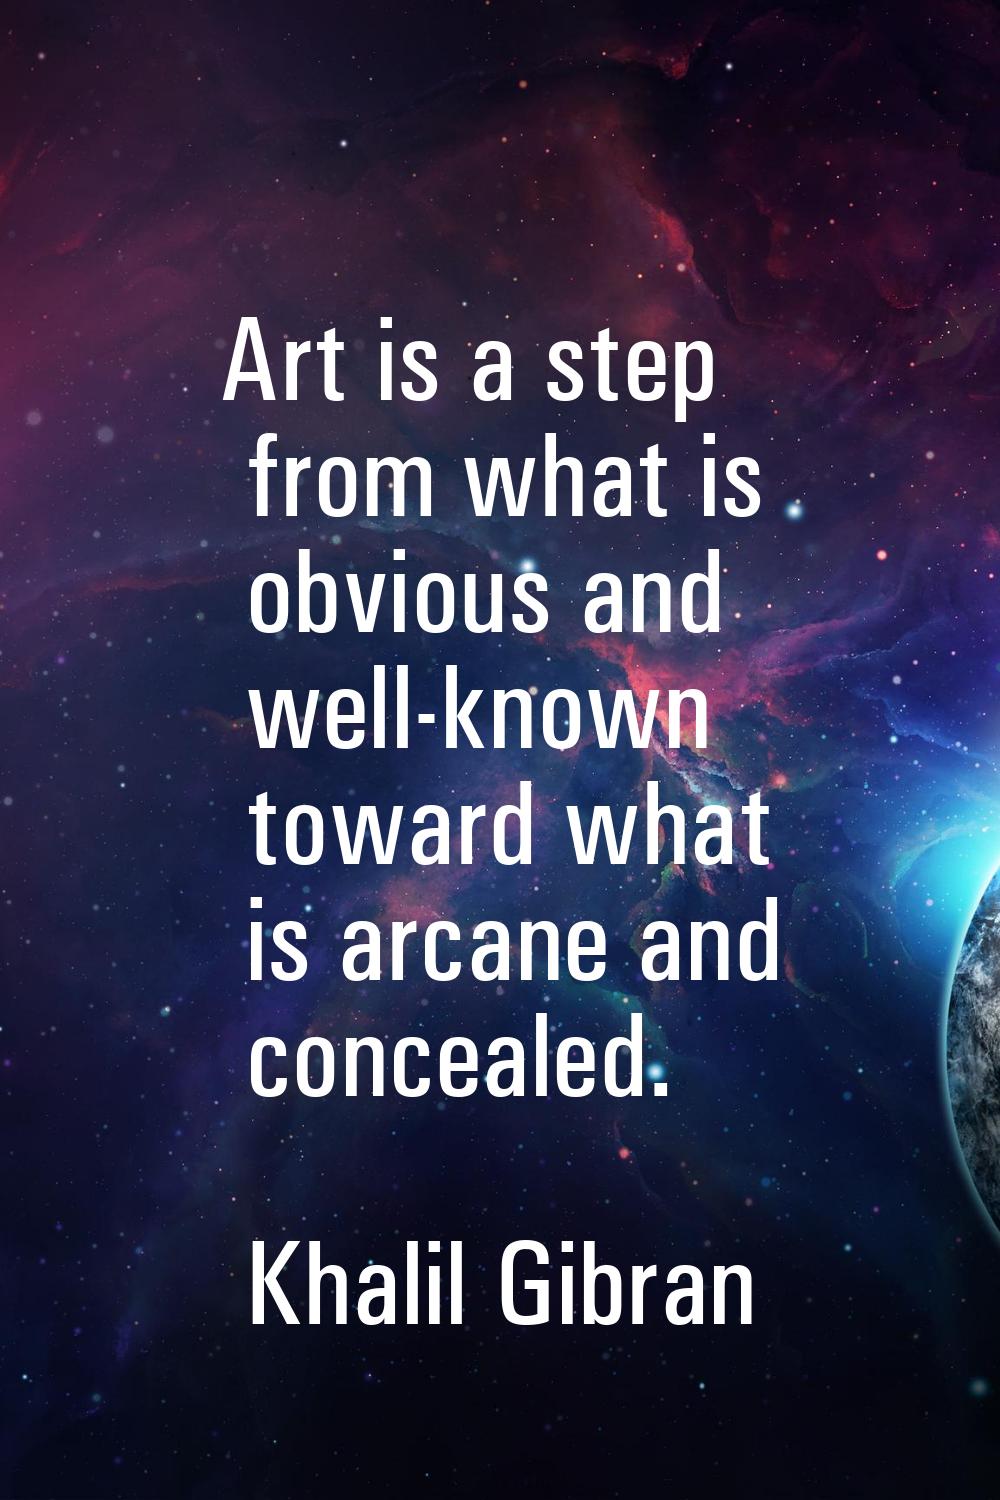 Art is a step from what is obvious and well-known toward what is arcane and concealed.